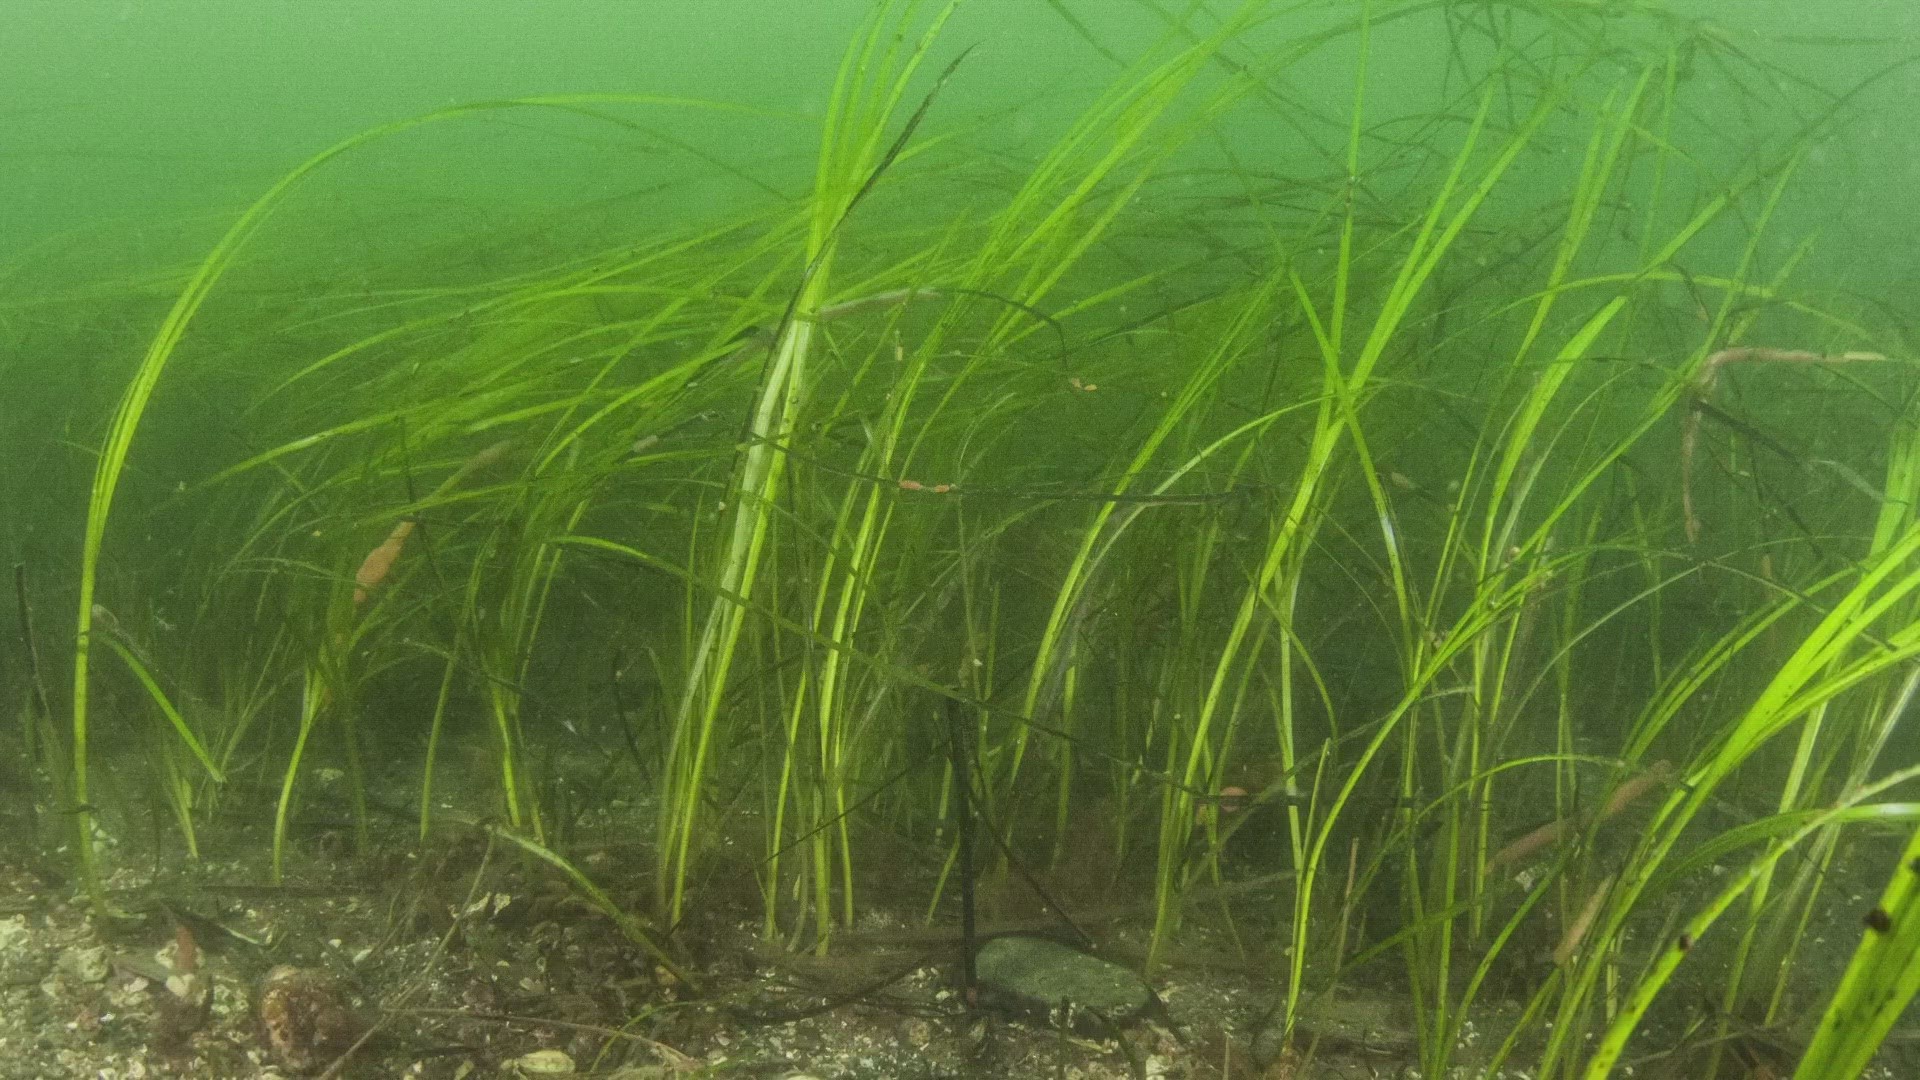 Eelgrass, according to Friends of Casco Bay, is home to juvenile lobster and fish. Without the eelgrass, much of Maine's seafood economy loses its base, it said.